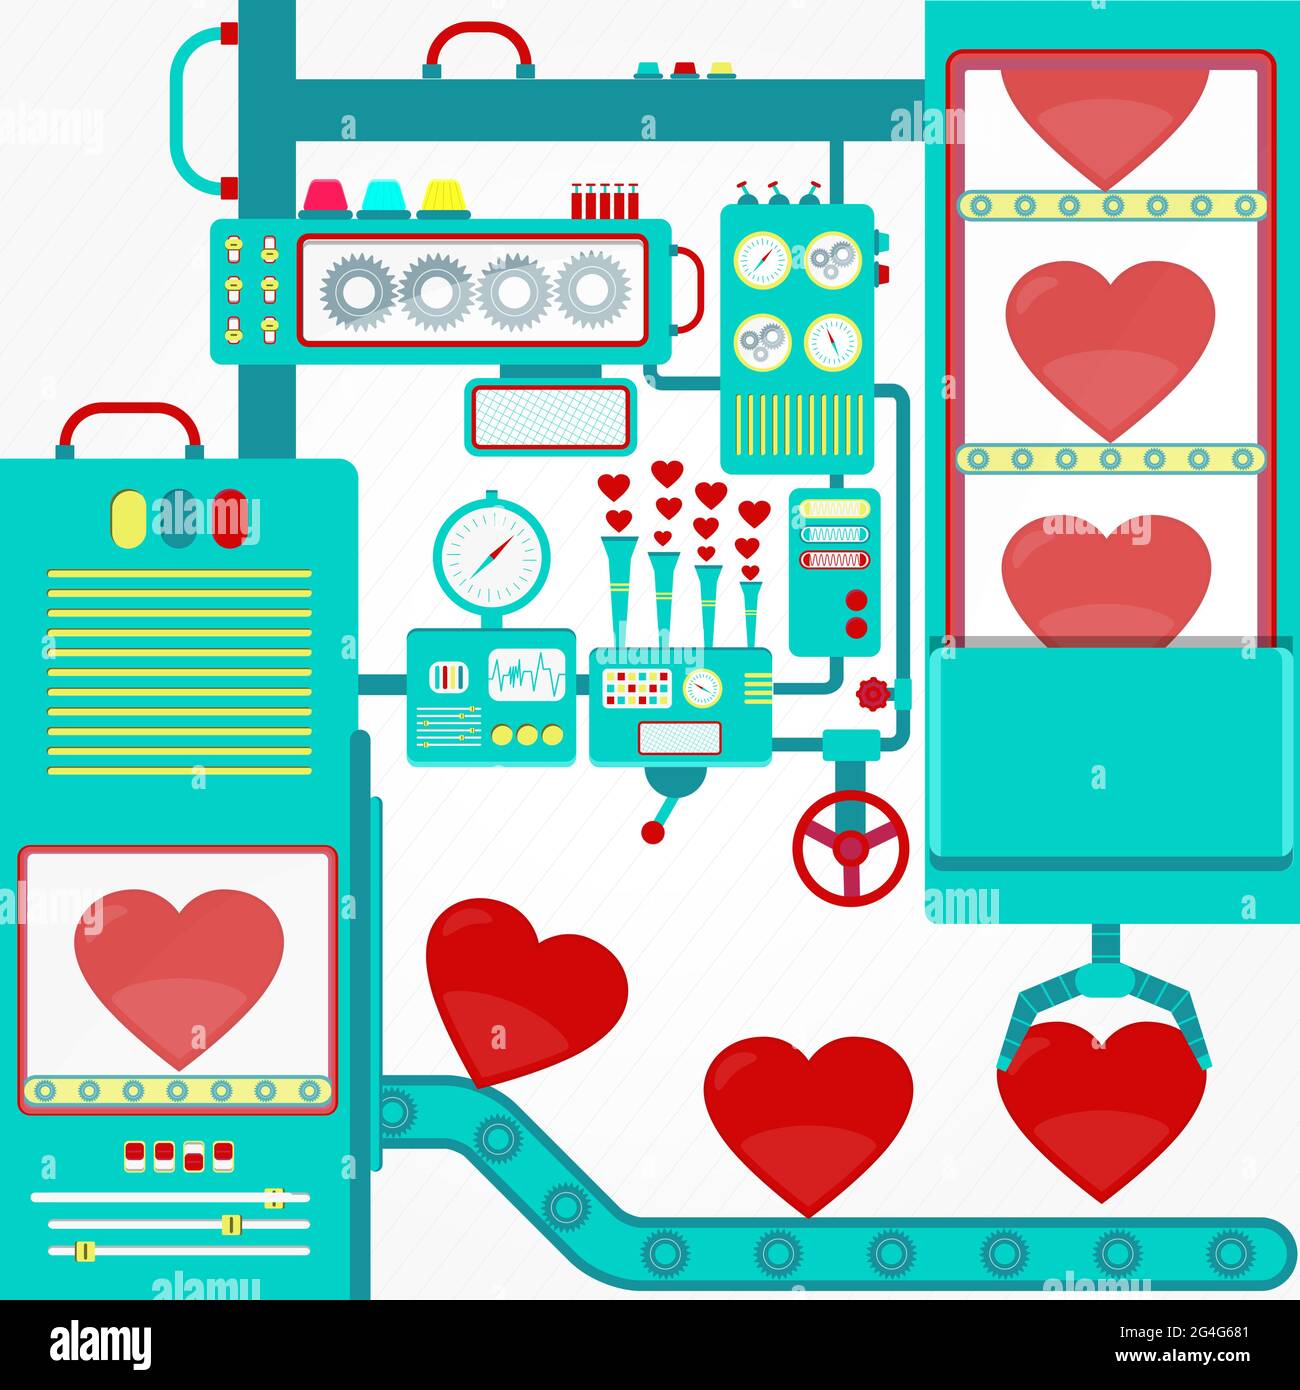 Industry of love with machinery and gripper holding red hearts. Fantasy. Stock Vector